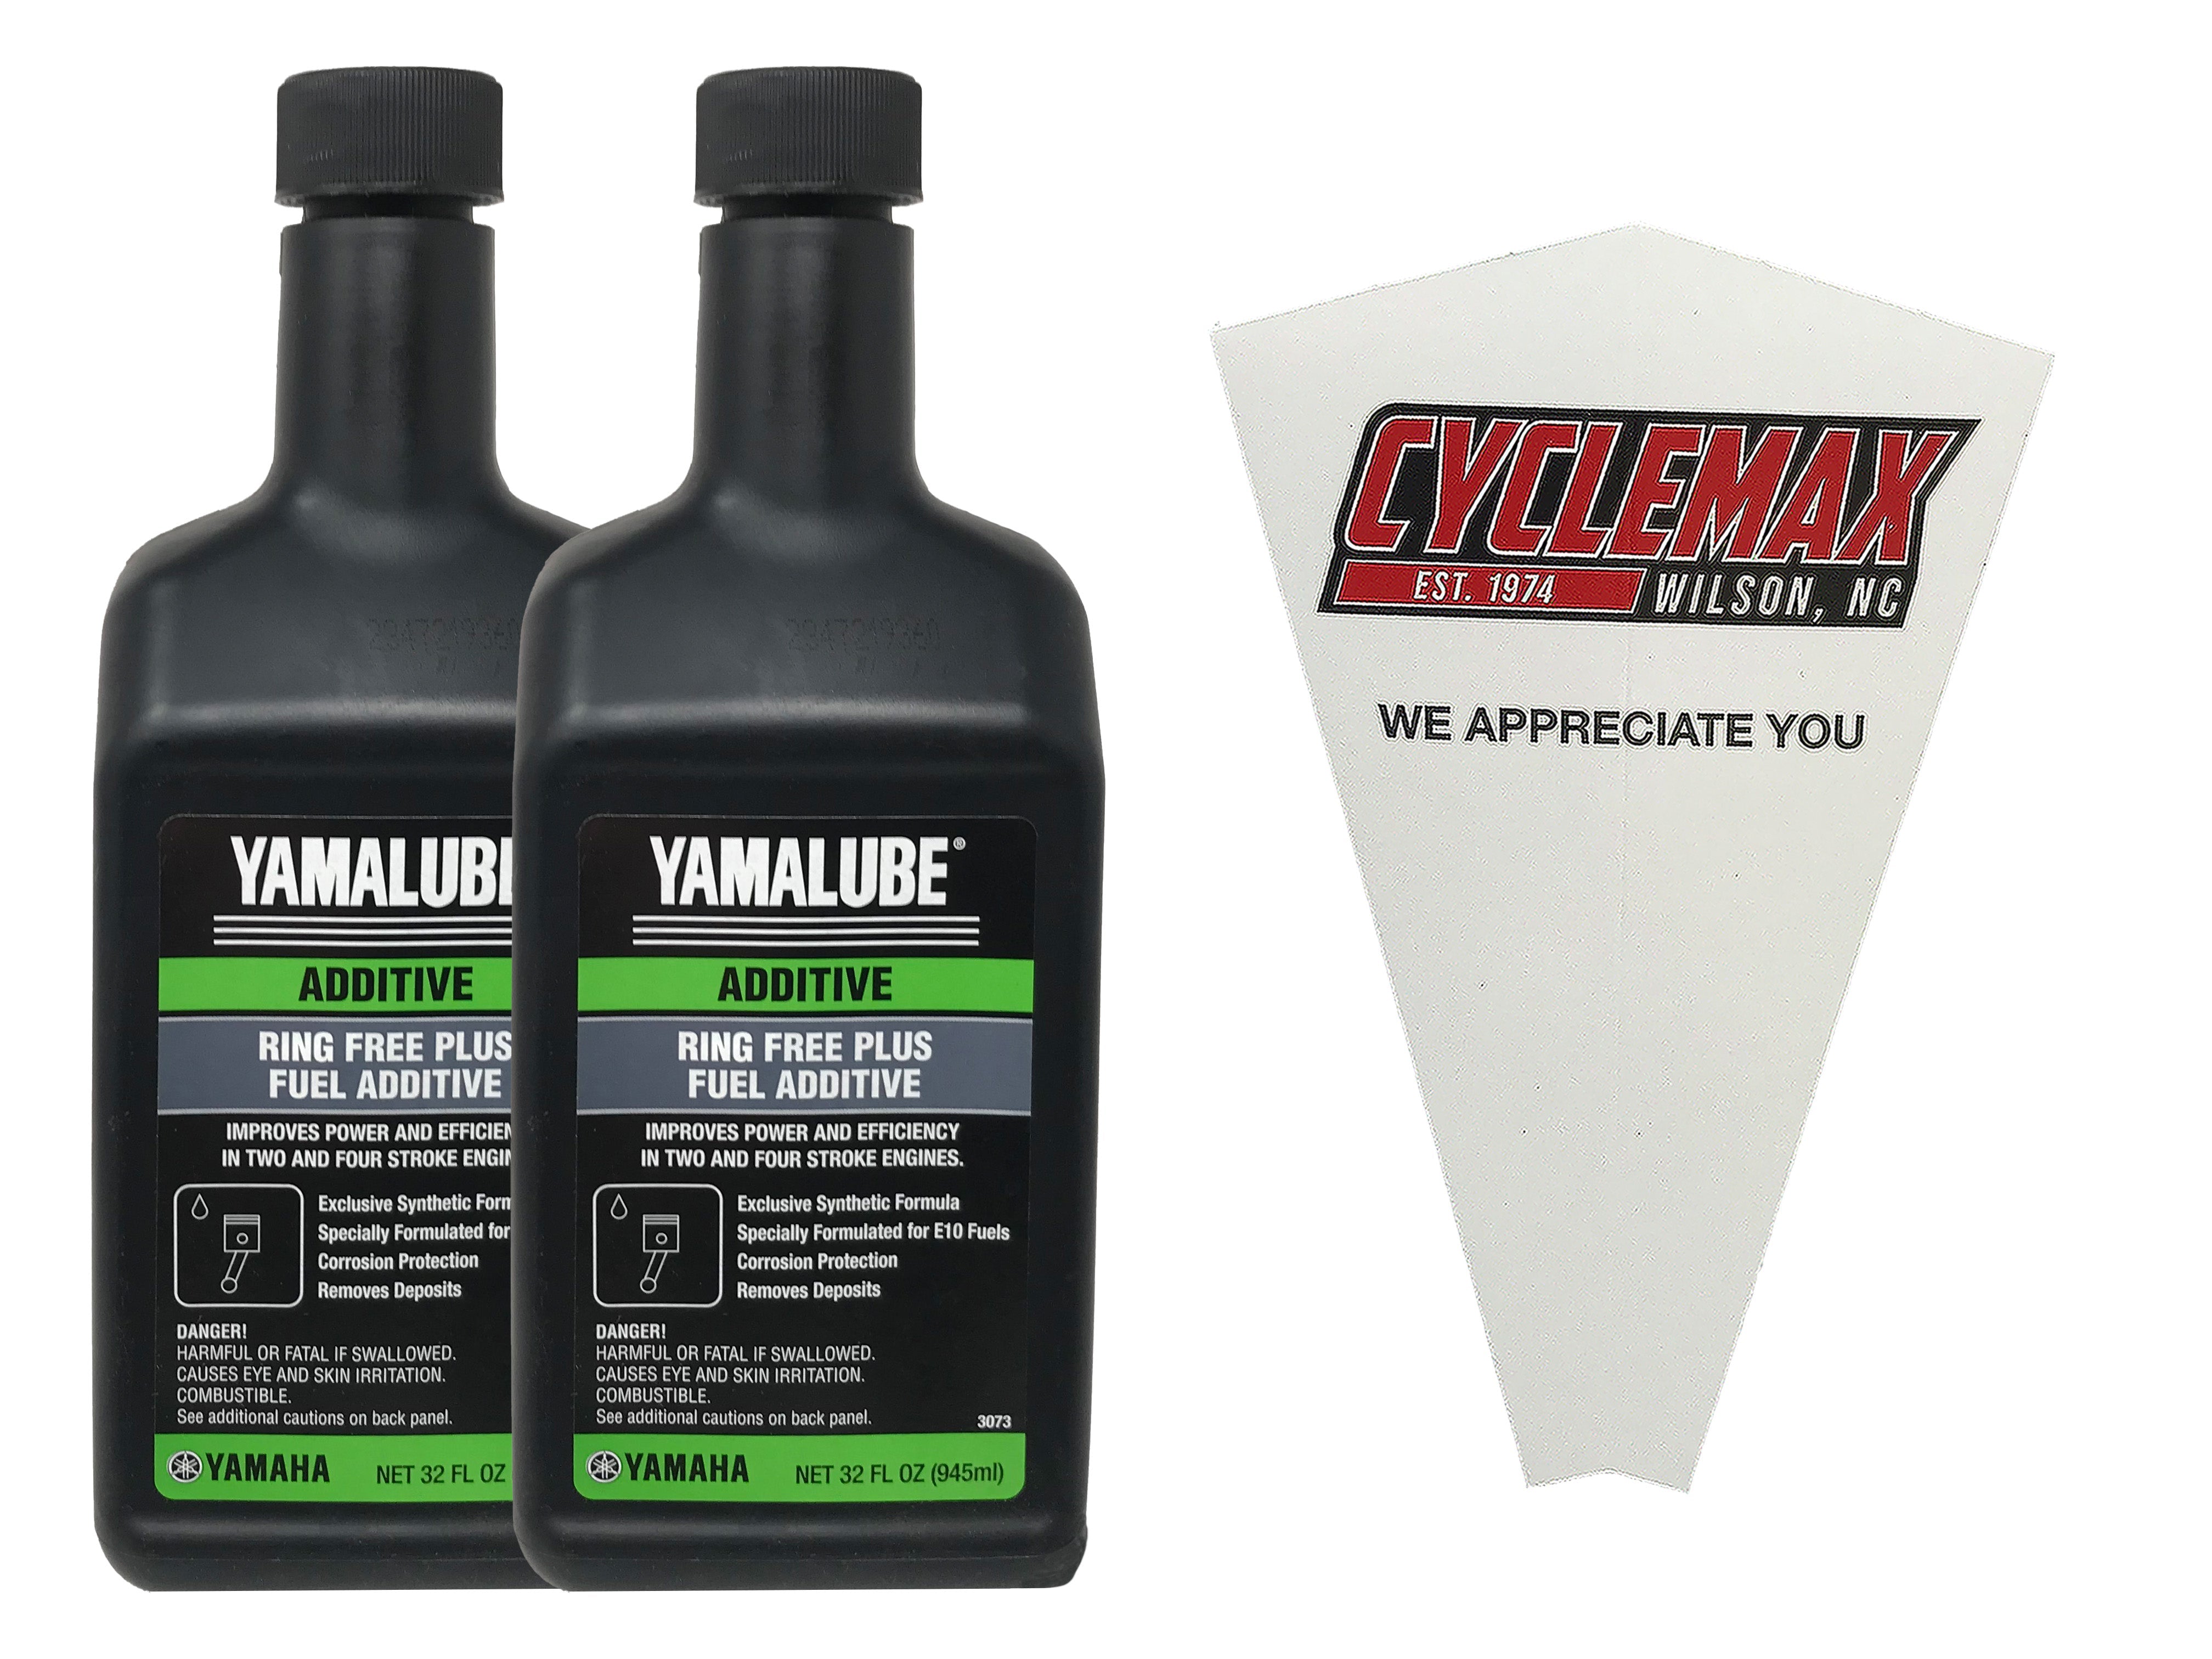 Cyclemax Two Pack for Yamaha Ring Free Plus Fuel Additive ACC-RNGFR-PL-32 Contains Two Quarts and a Funnel